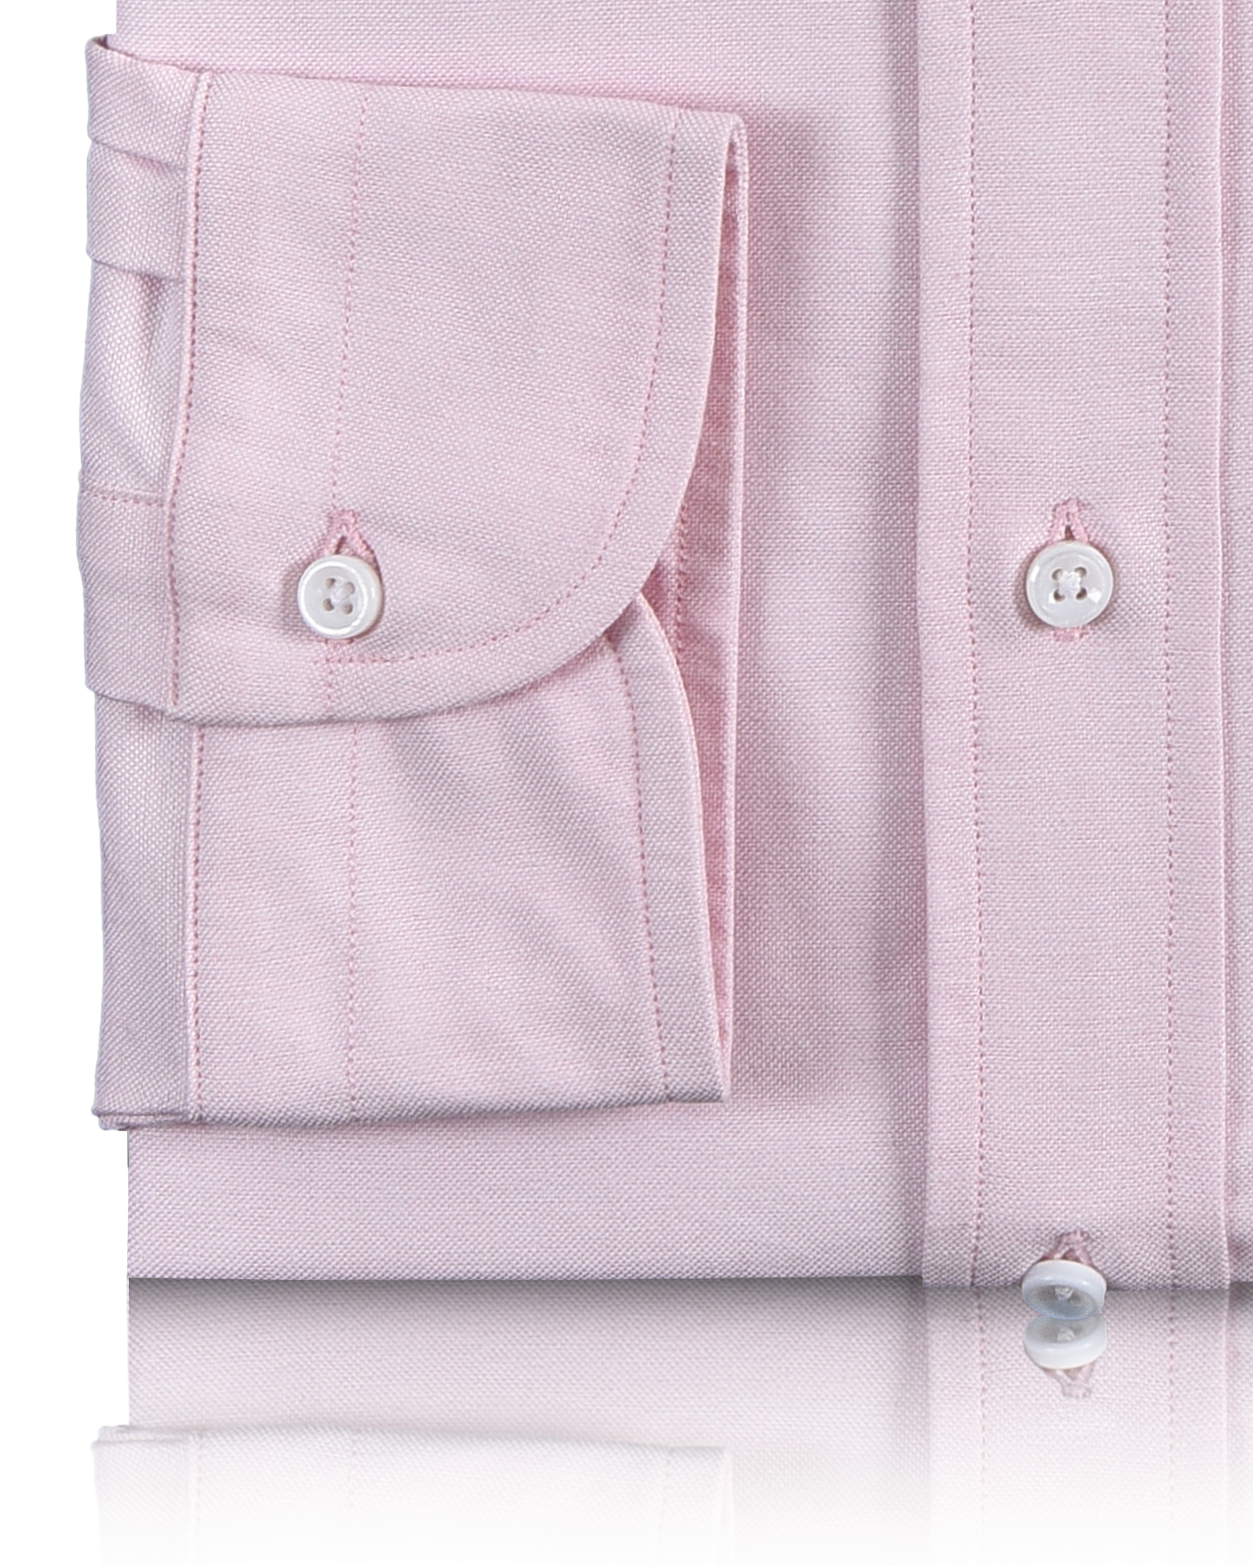 Cuff of the custom oxford shirt for men by Luxire in pale pink 2